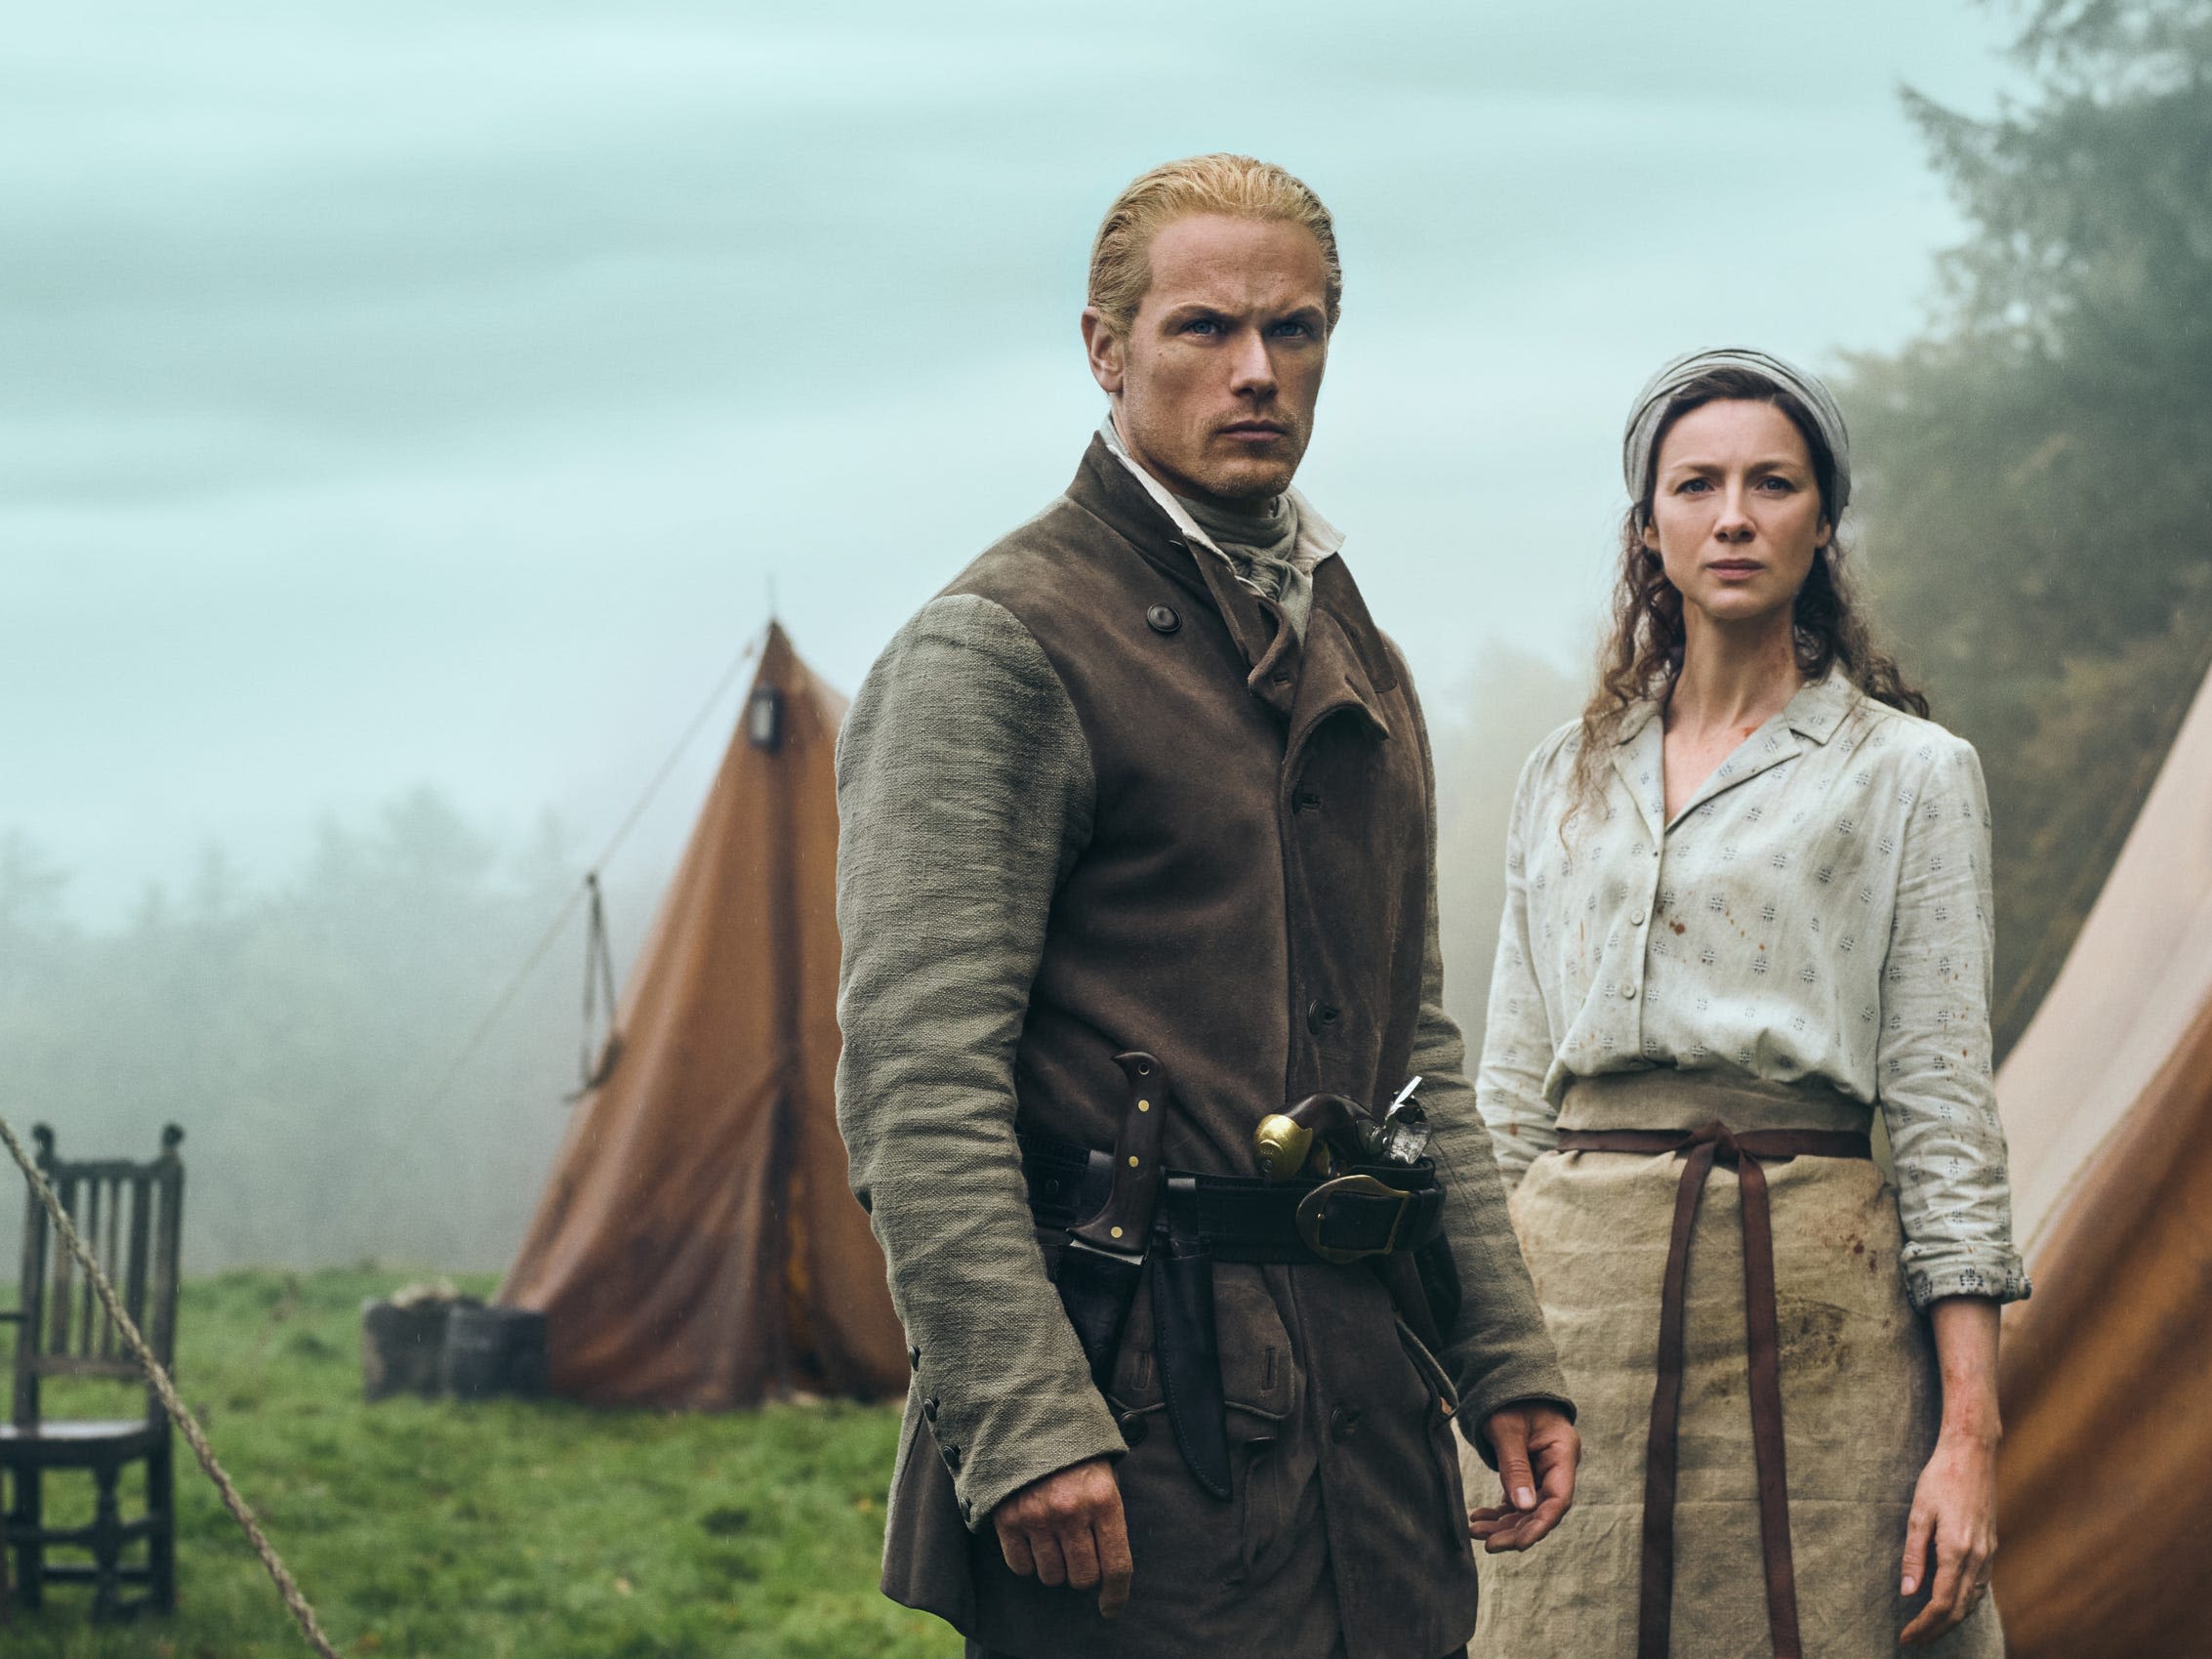 'Outlander' season 7's return date has finally been announced. Here's everything we know about the new episodes.